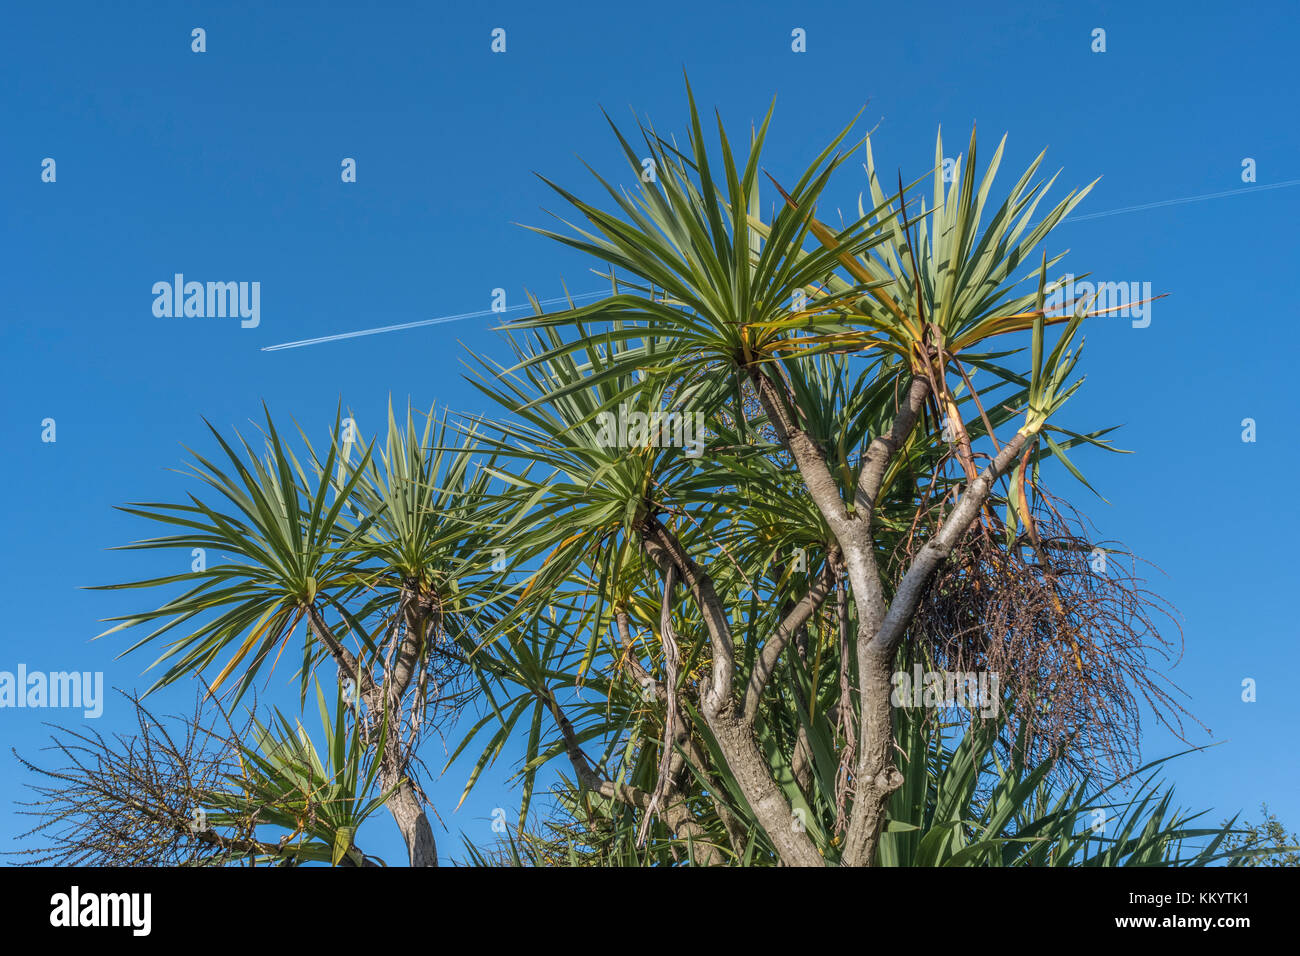 Cordyline australis palm set against bright blue sky in Cornwall, with vapour trails of an overhead passenger plane. Metaphor overseas holidays. Stock Photo